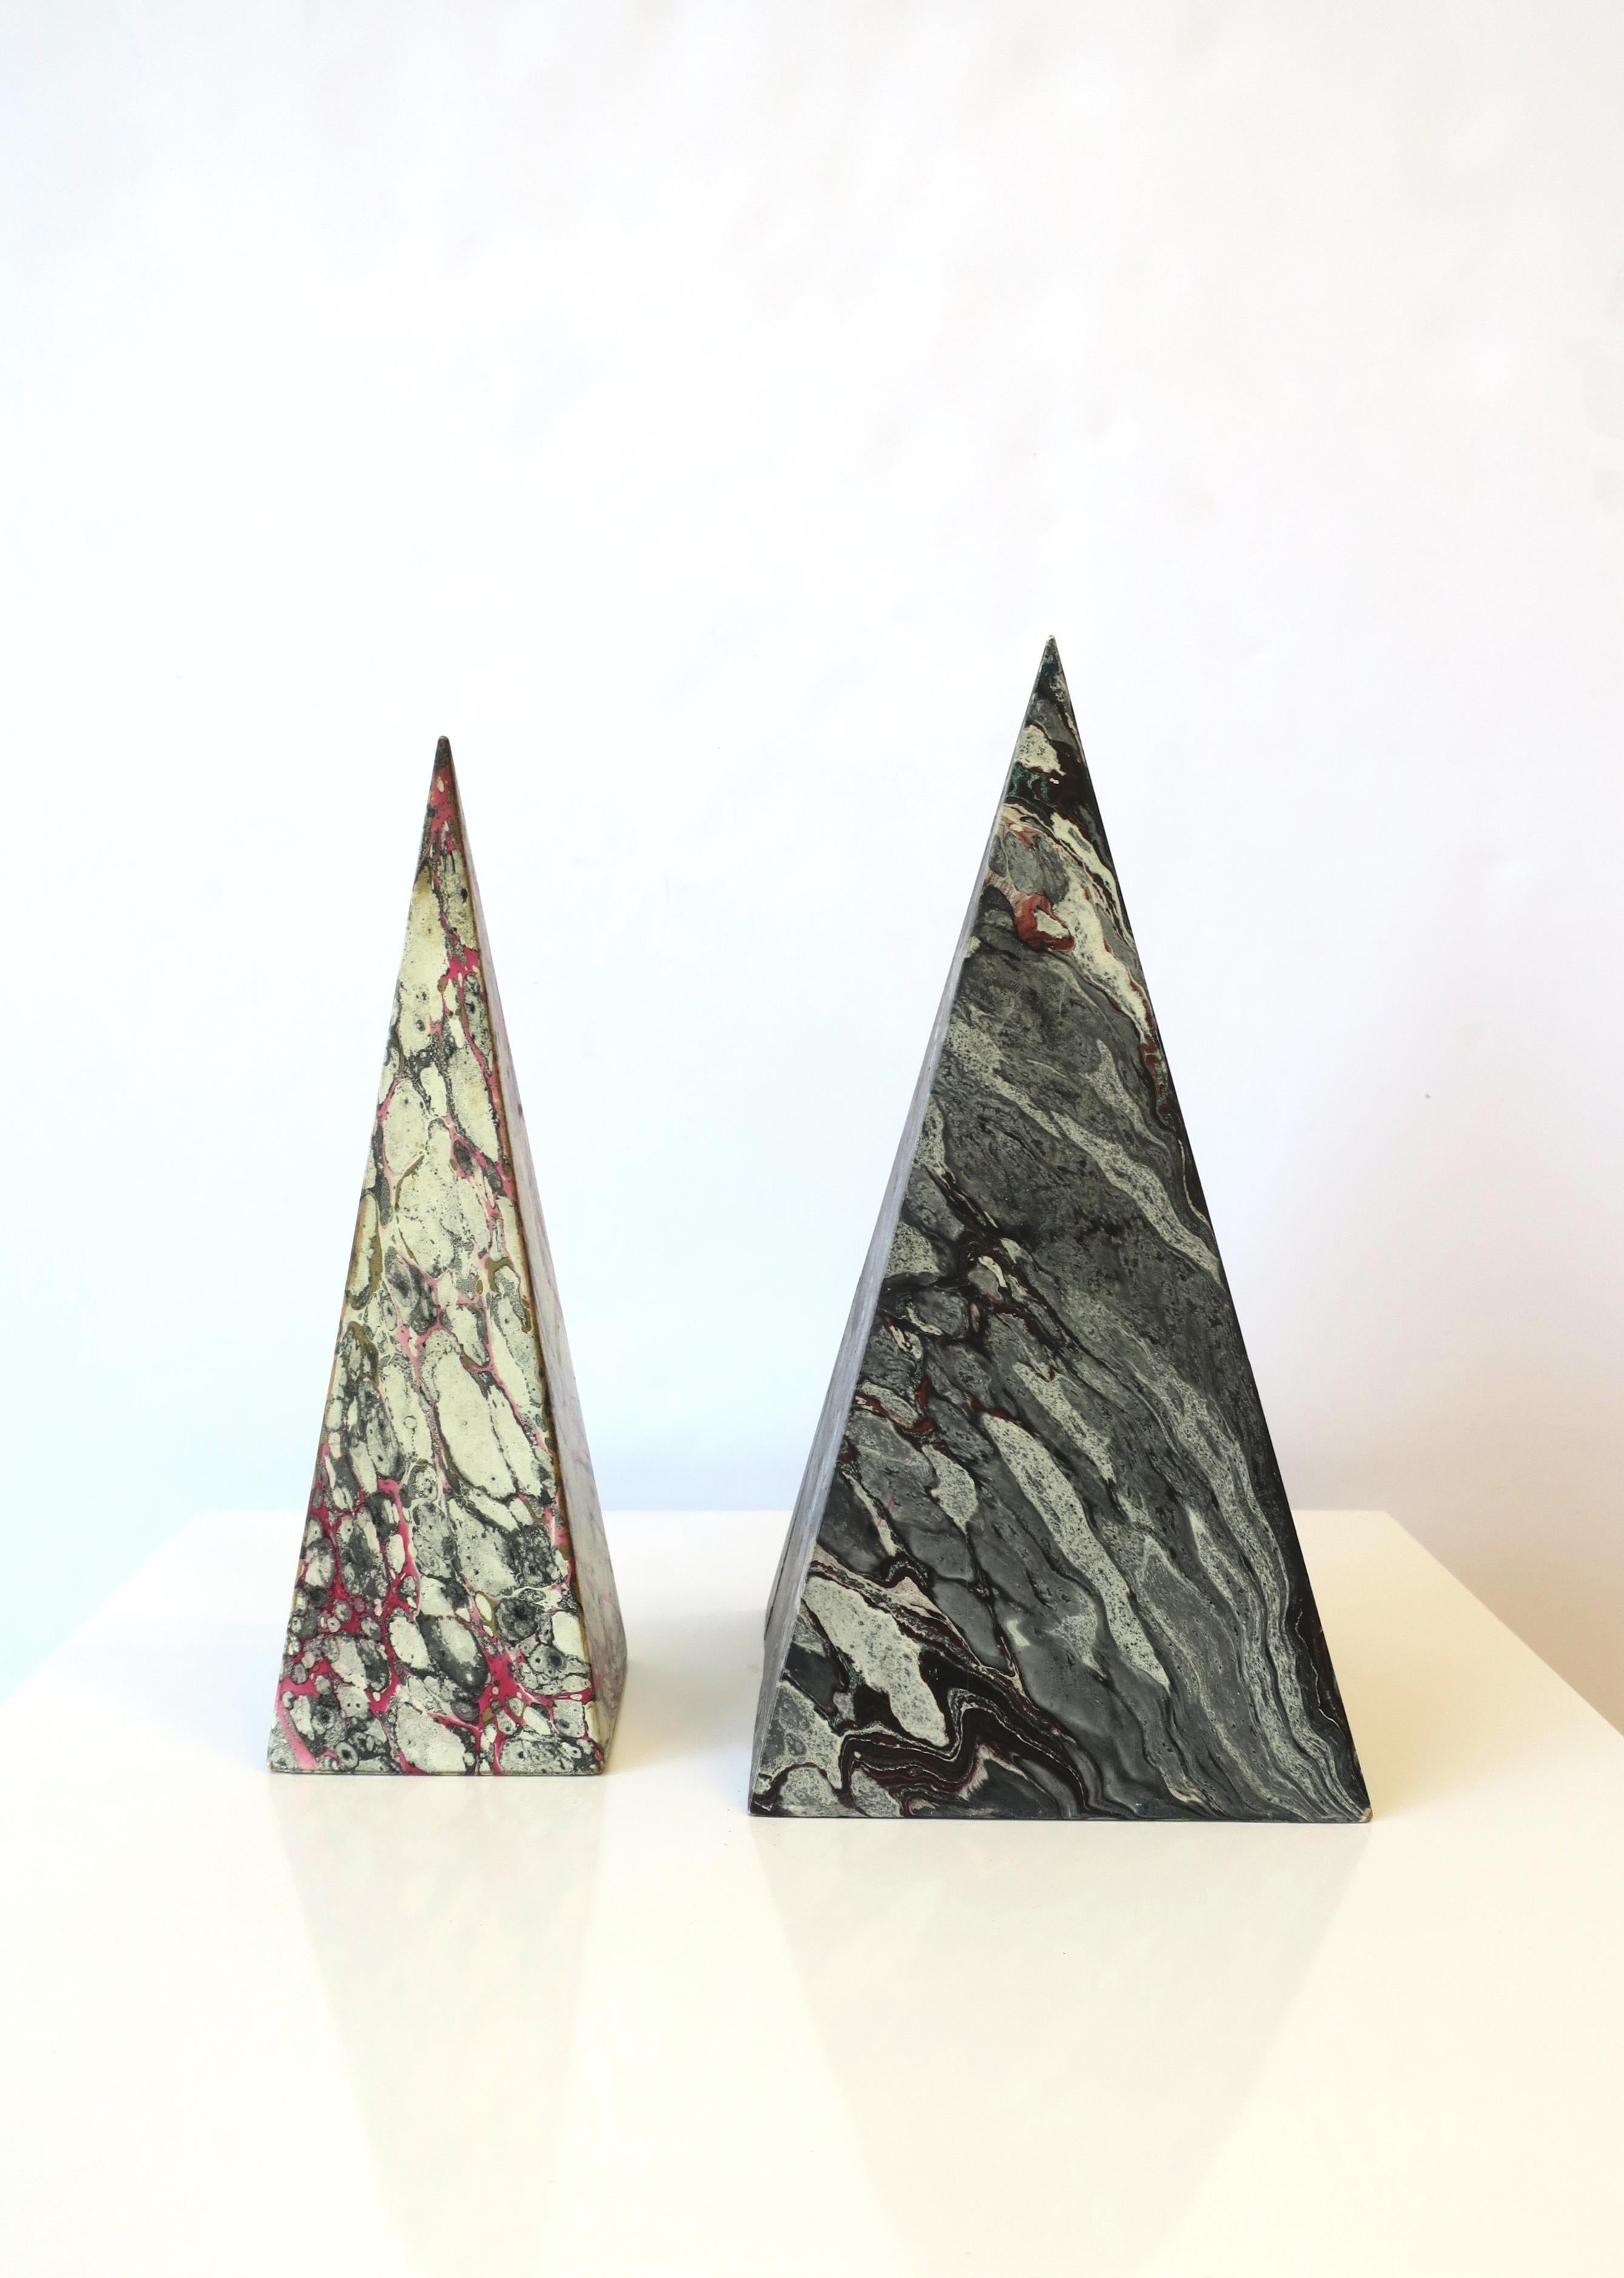 A beautiful set of two (2) pyramid Obelisks, in the Modern style, circa mid-20th century, Italy. Pyramids are wood, wrapped in hand designed Italian paper; One is a combination of white, gray, black and pink, and the other is shades of grey, black,